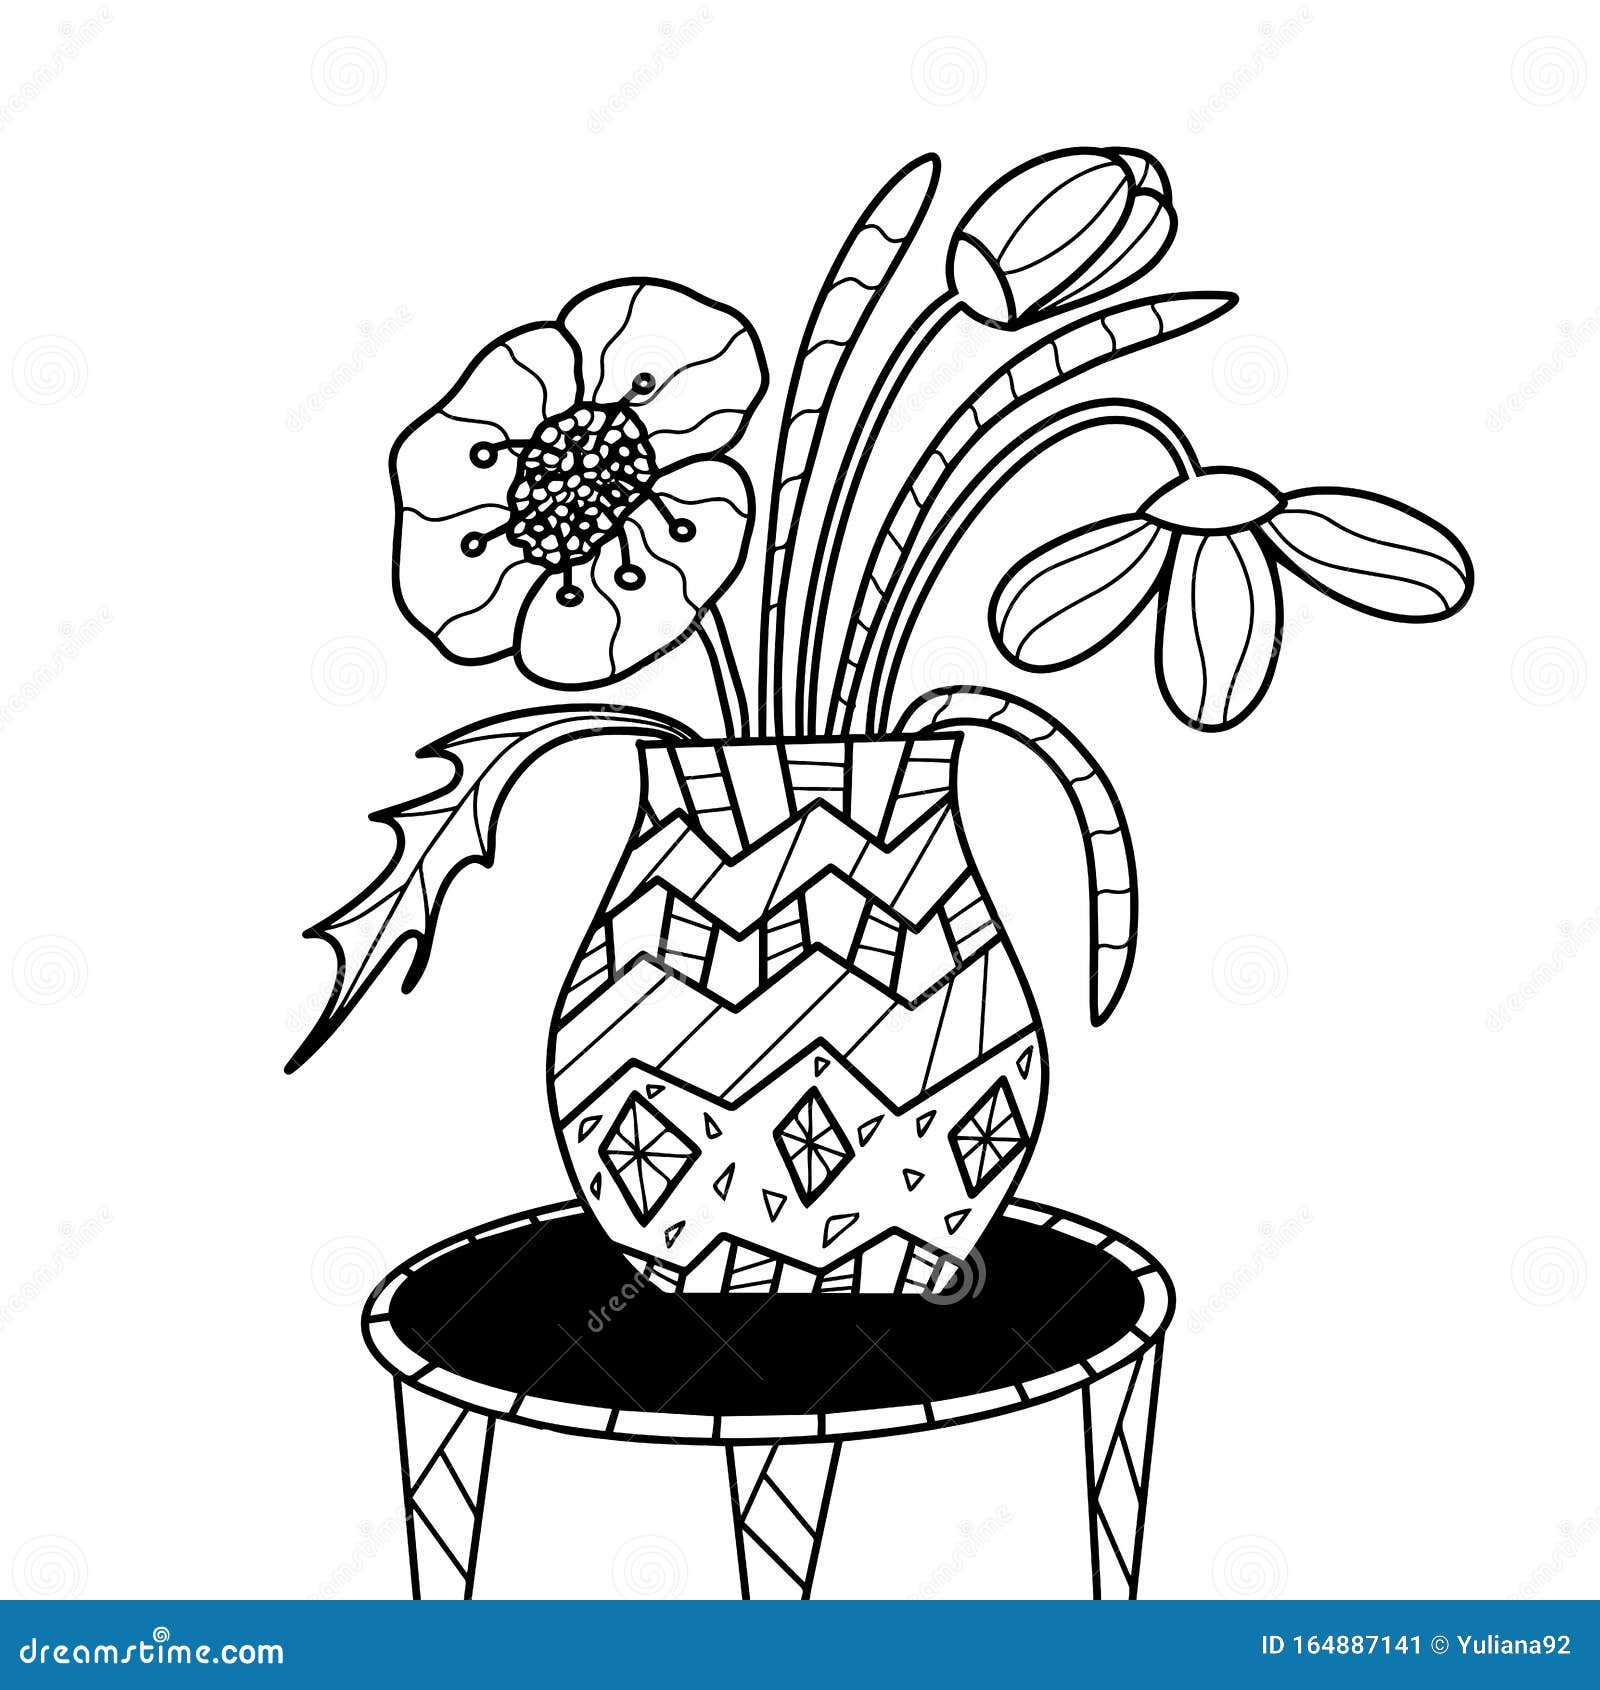 flower vase pictures to color